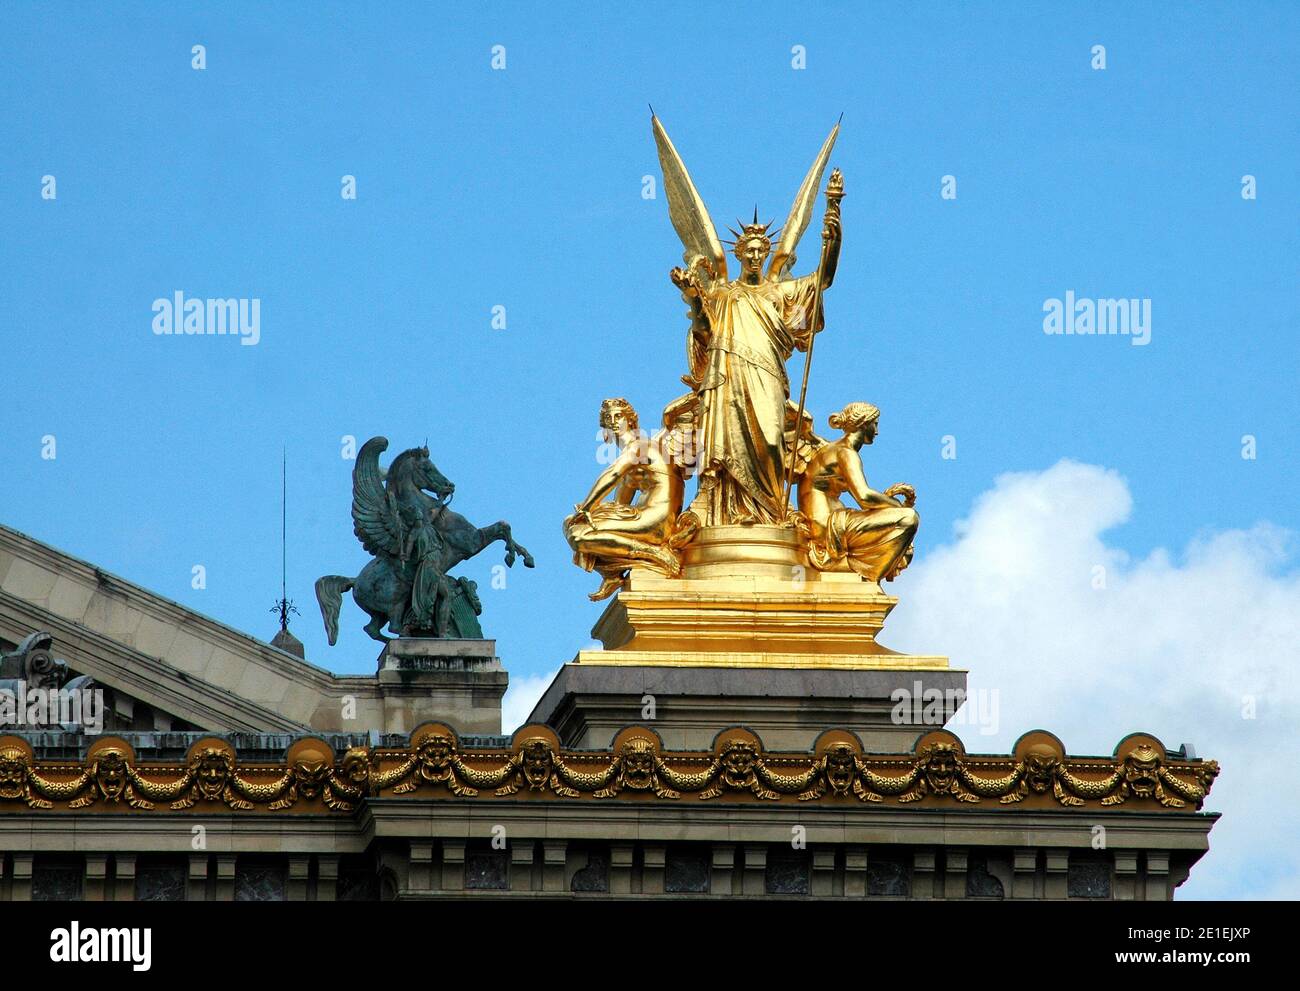 The Opera Garnier, also known as the Palais Garnier or 'Opera de Paris is a 2,200-seat opera house on the Place de l'Opera in Paris, France, which was the primary home of the Paris Opera from 1875 until 1989, designed by architect Charles Garnier in the Neo-Baroque style. The Palais Garnier was designed as part of the great Parisian reconstruction of the Second Empire initiated by Emperor Napoleon III, who chose the Baron Haussmann to supervise the reconstruction. The project was put out to open competition in 1861, and was won by the architect Charles Garnier and construction was started in 1 Stock Photo